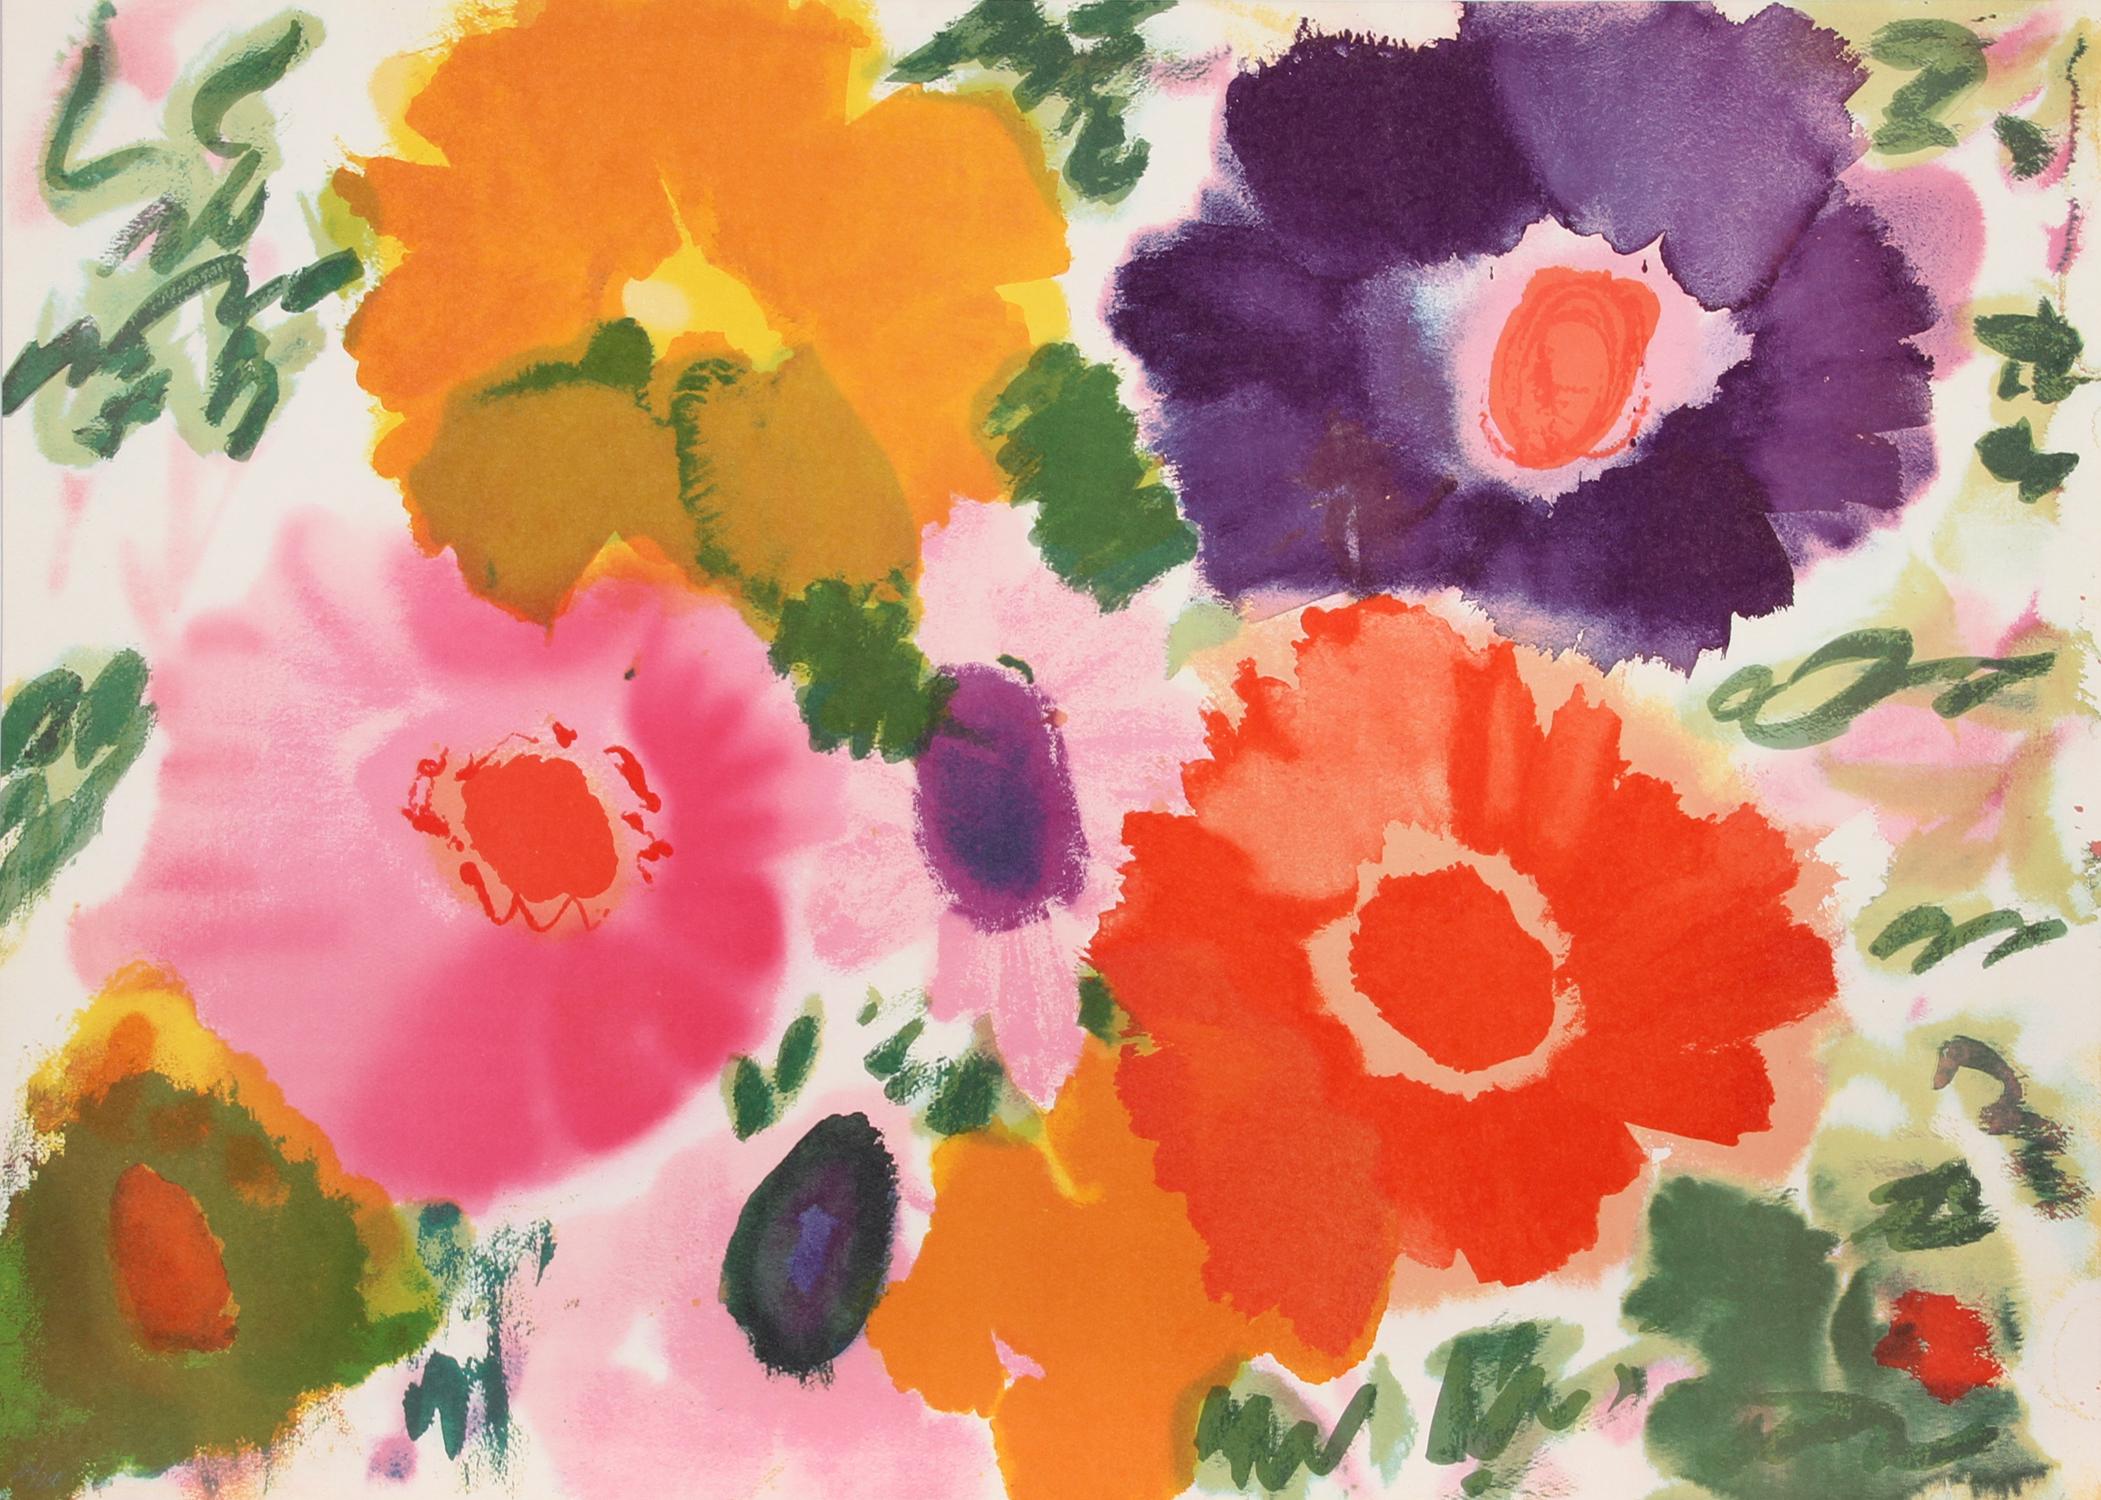 Flowers V, Lithograph by Helen Covensky